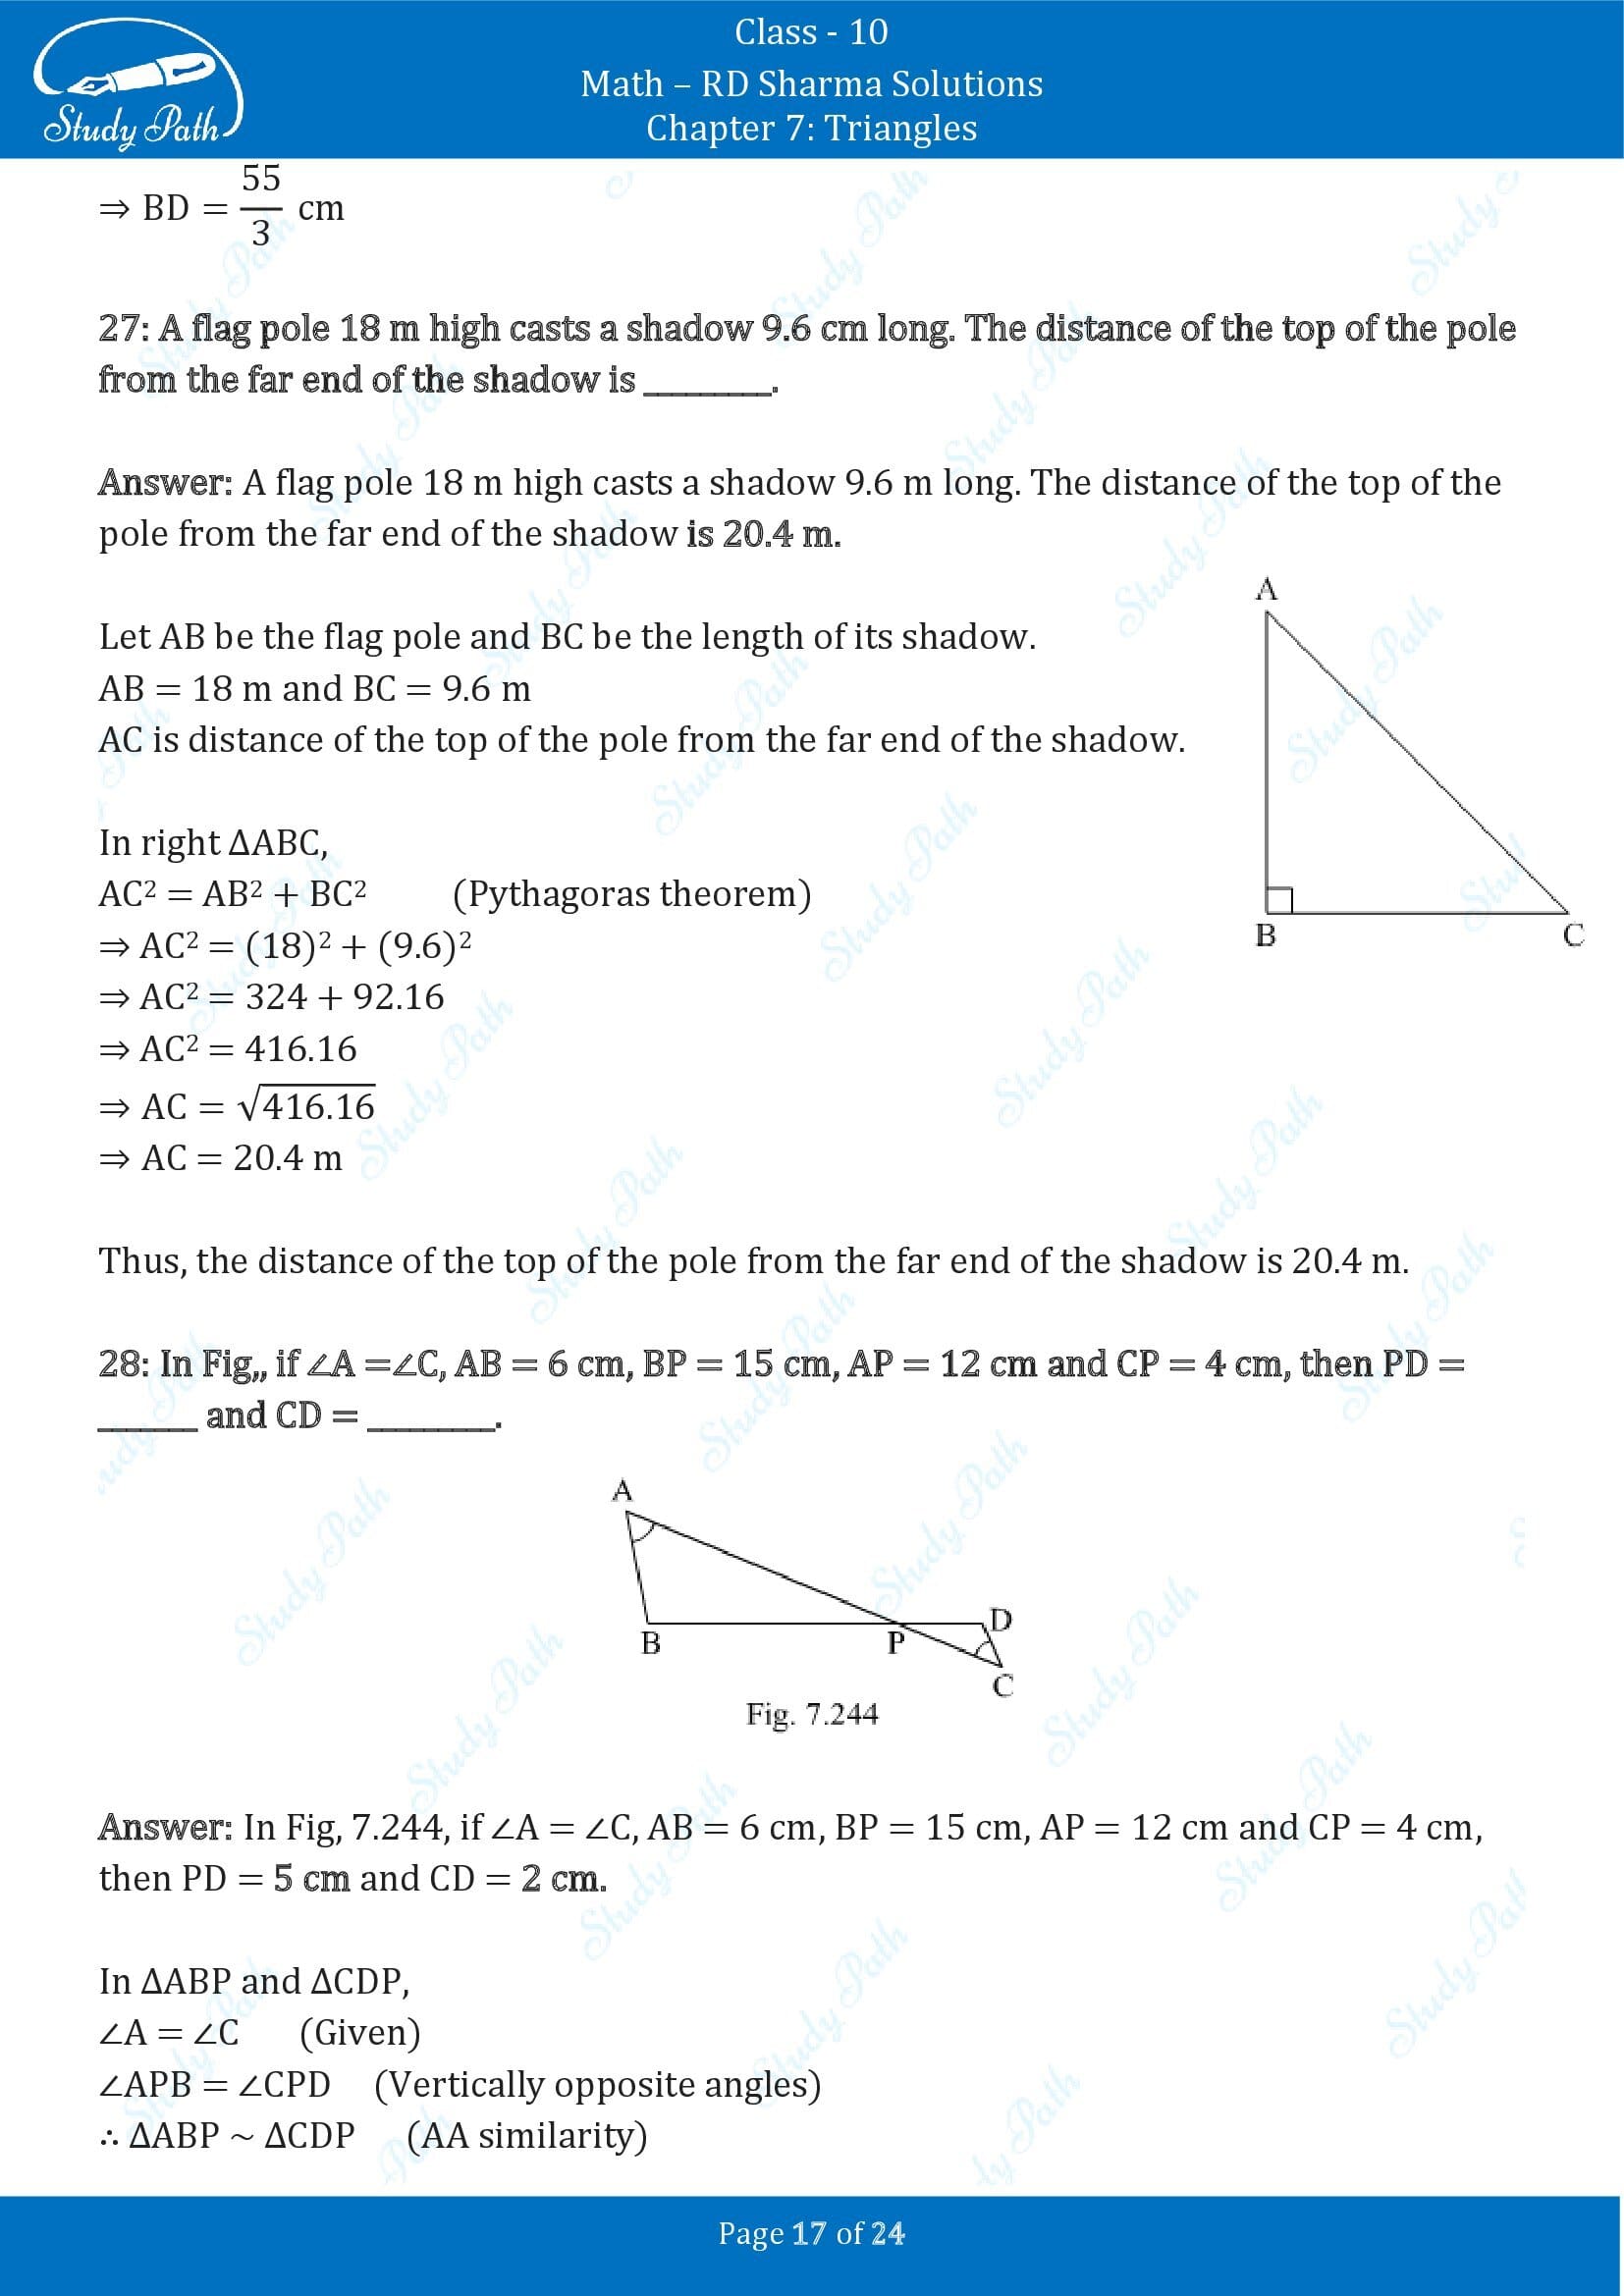 RD Sharma Solutions Class 10 Chapter 7 Triangles Fill in the Blank Type Questions FBQs 00017